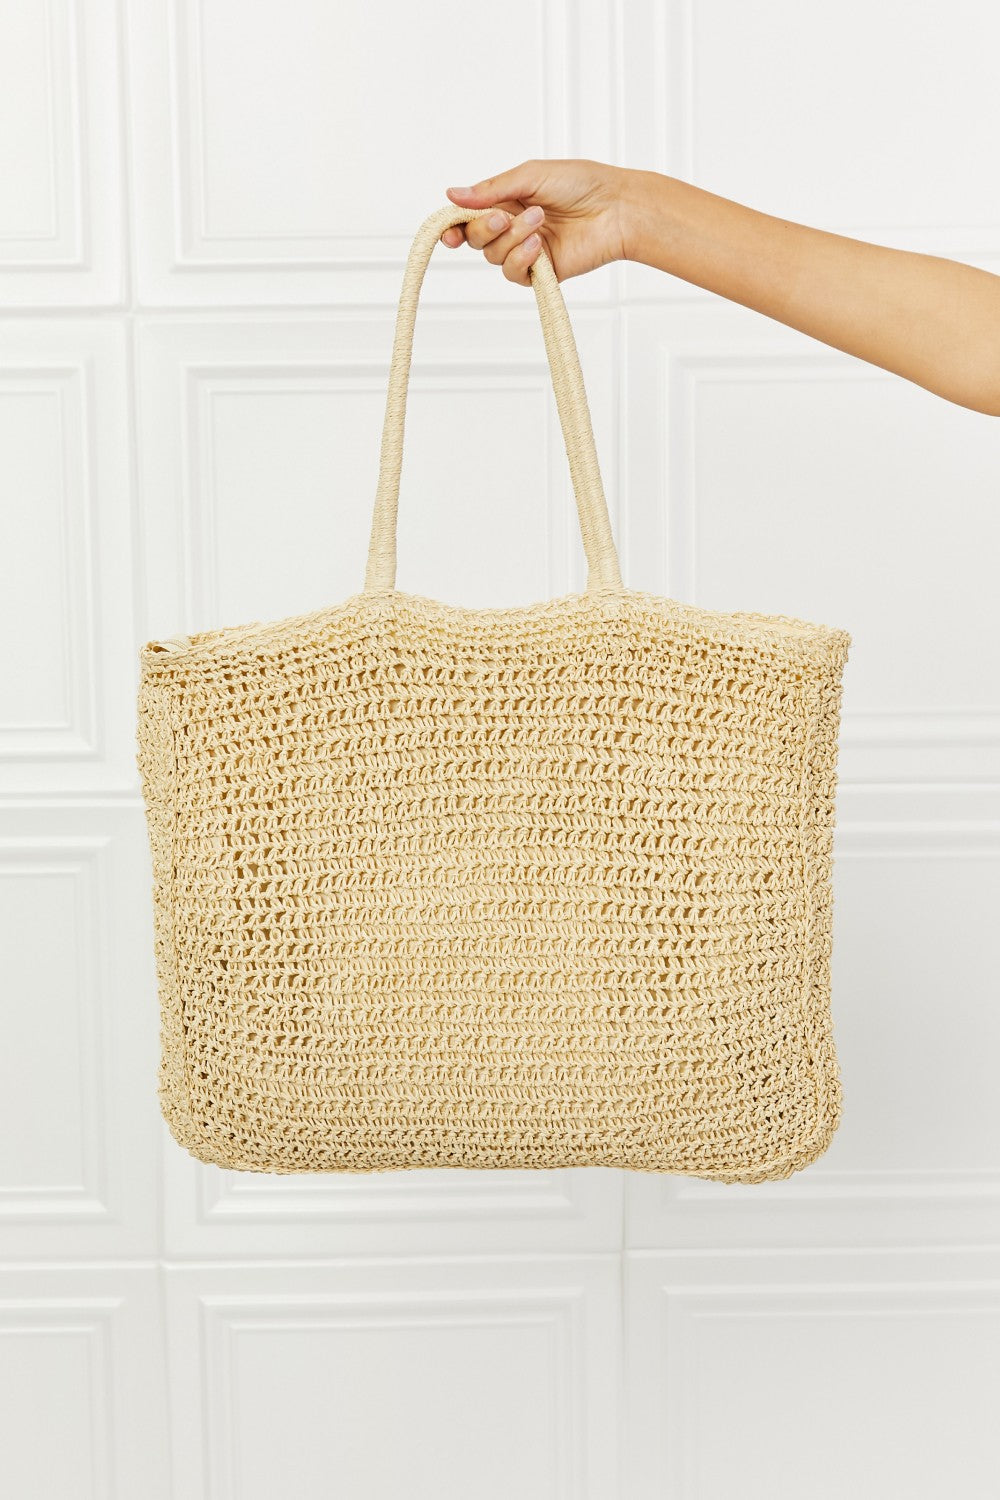 Fame Off The Coast Straw Tote Bag - Online Only